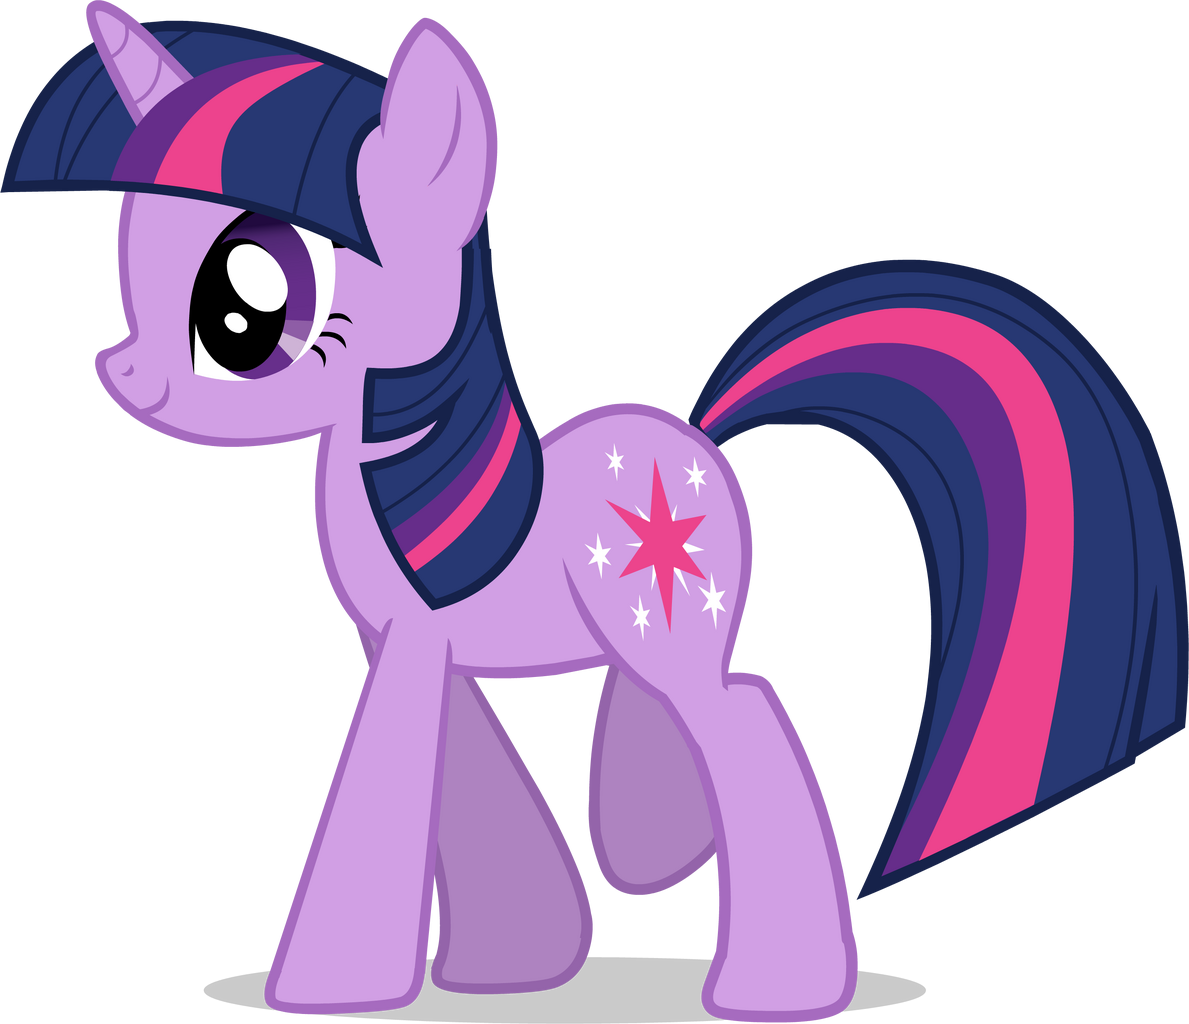 Image - AiP TwilightSparkle.png - My Little Pony Friendship is Magic Wiki